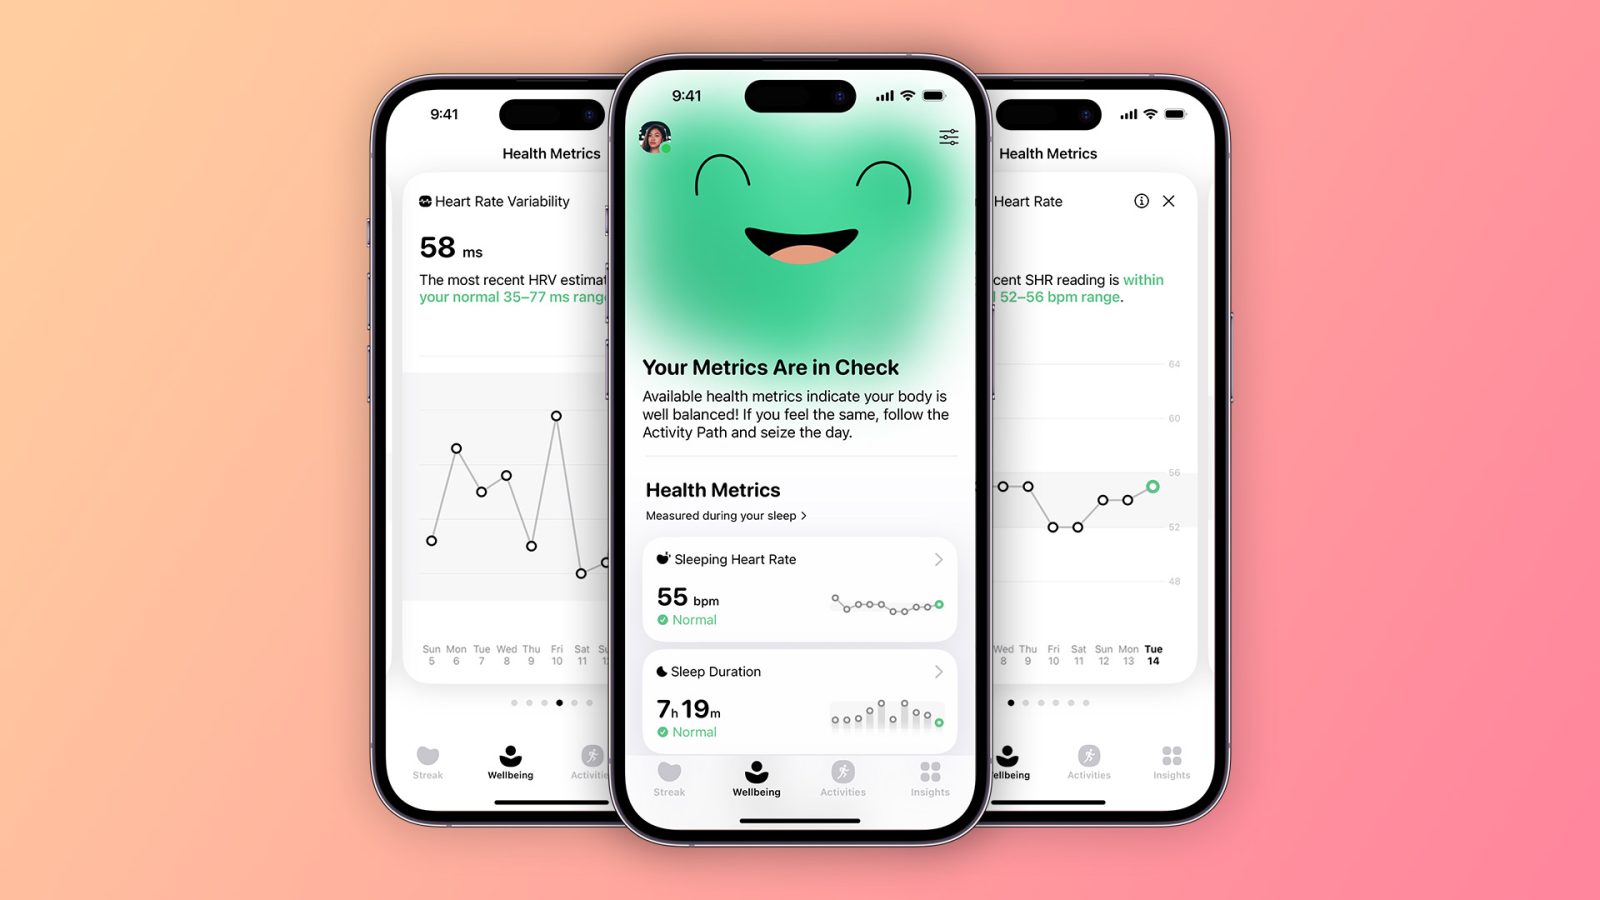 Gentler Streak gets new 'Wellbeing' section to show users an intuitive summary of their health data